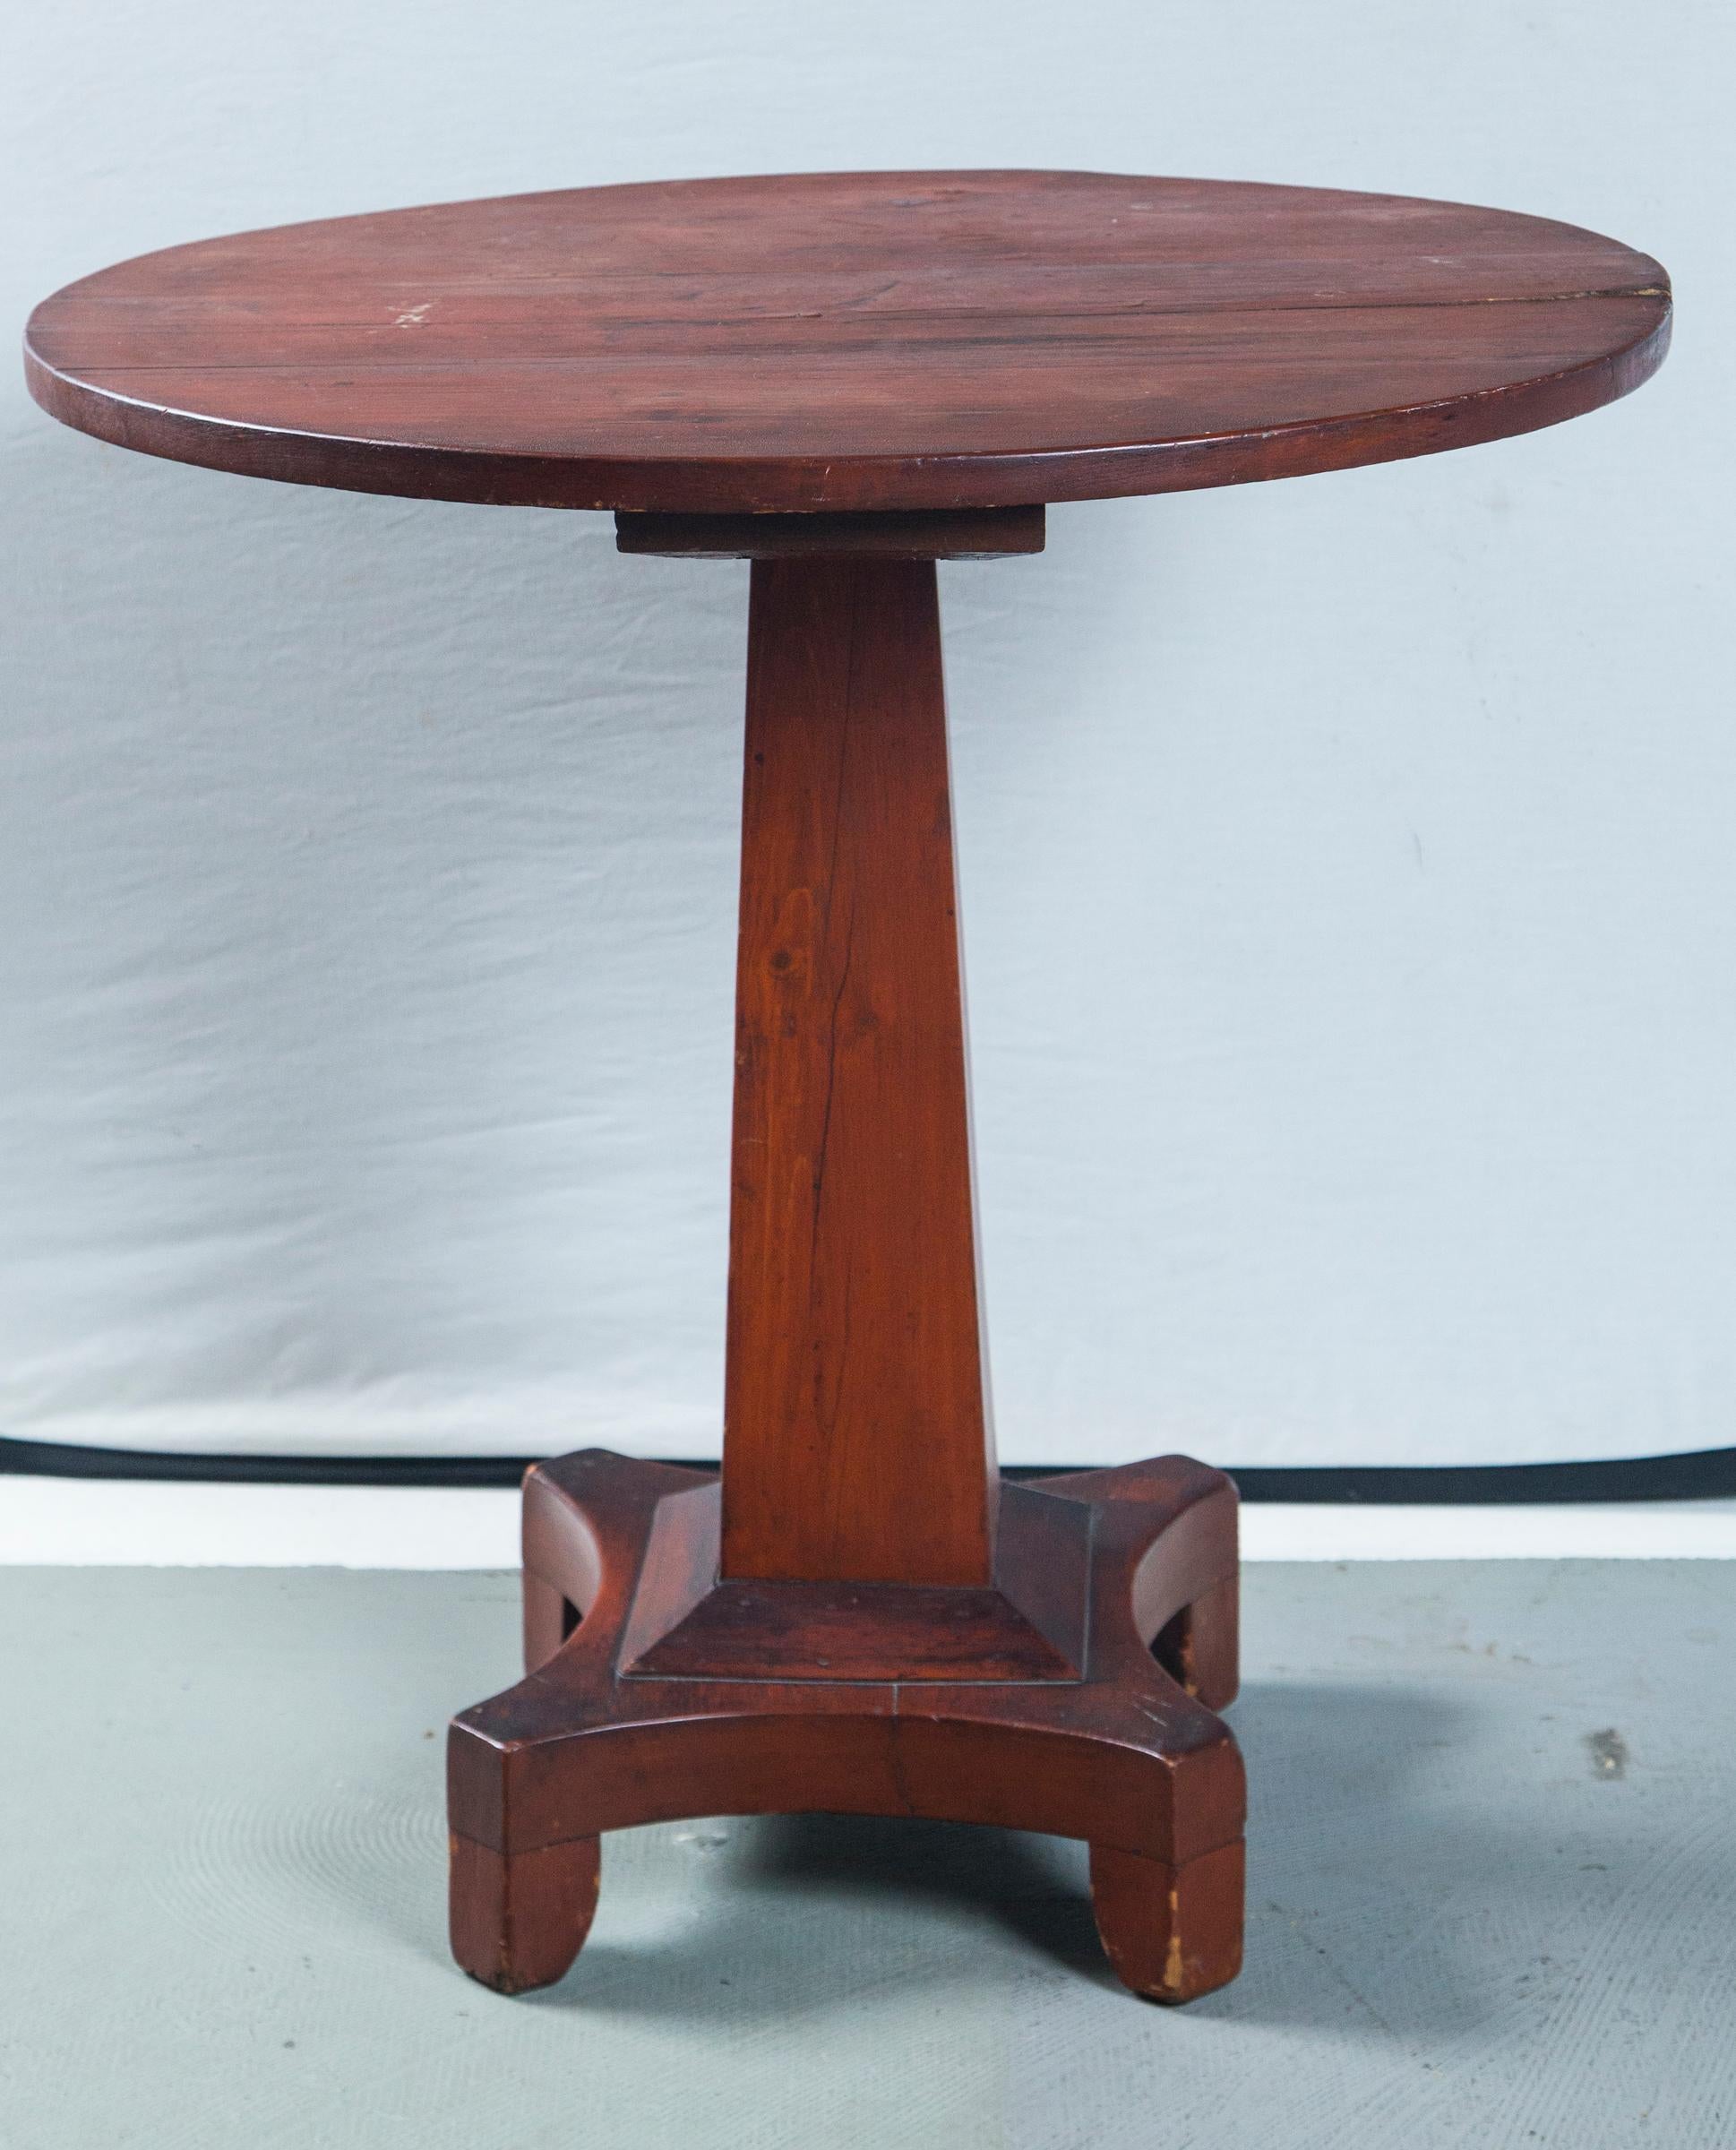 American country Empire table with original red wash, circa 1850.